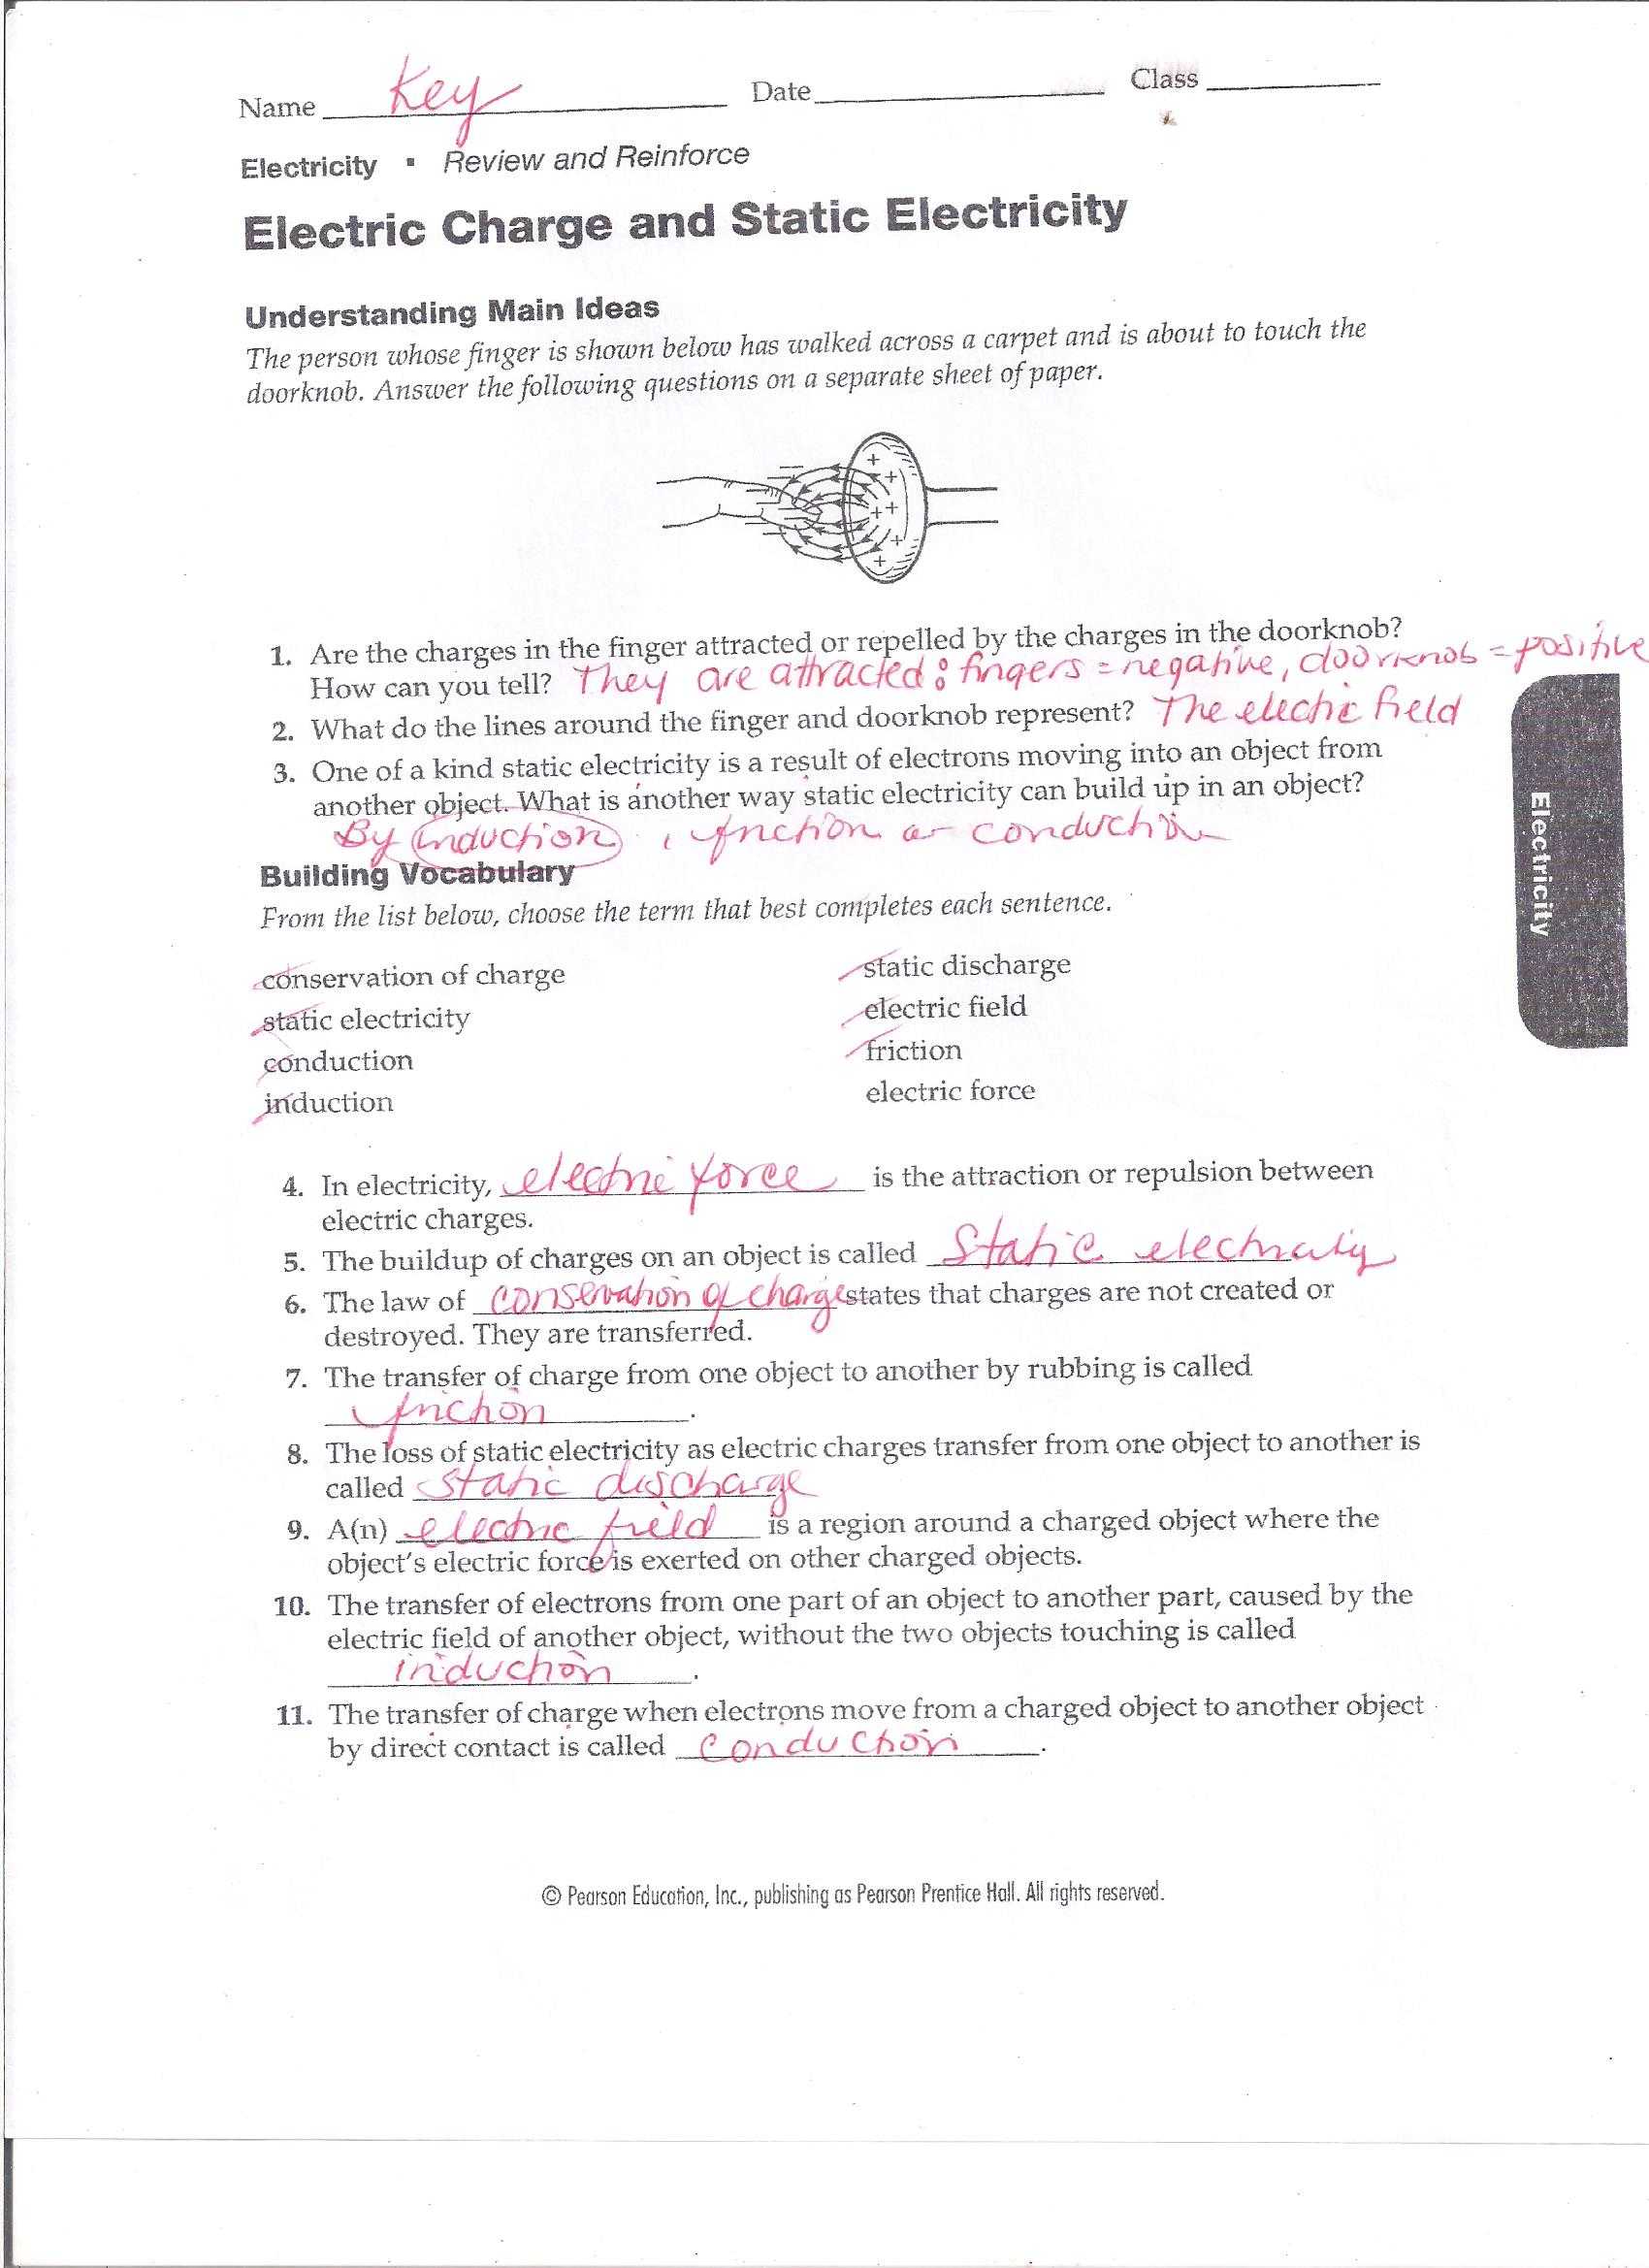 Physics Worksheets with Answers or Free Electricity Worksheets Image Collections Worksheet for Kids